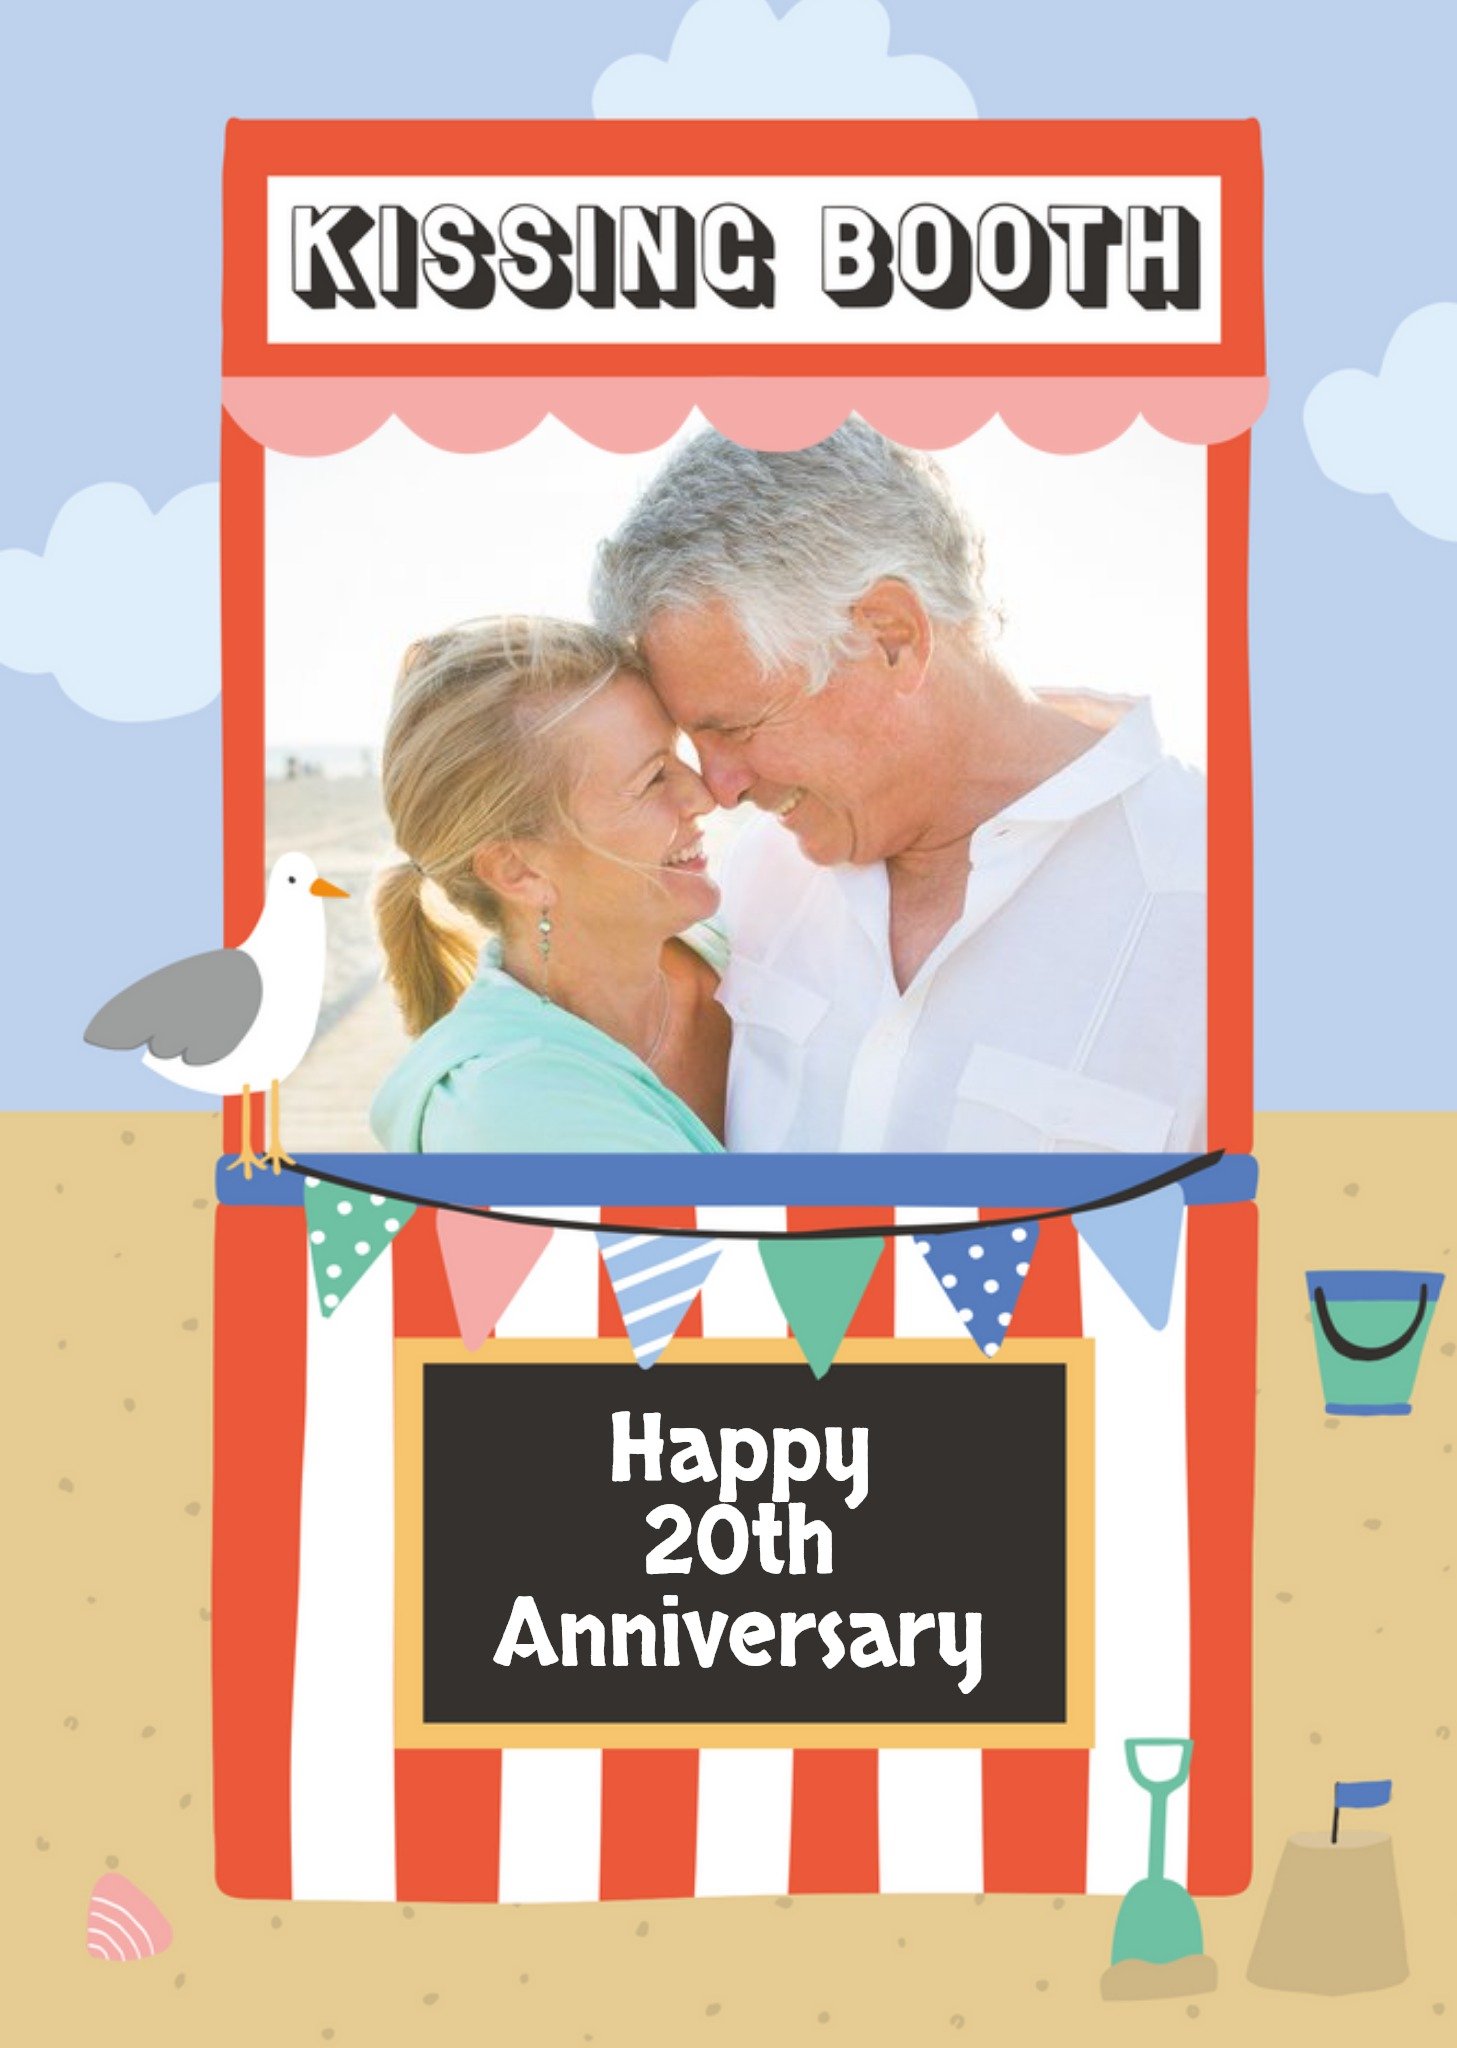 Moonpig Personalised Photo Illustrated Kissing Booth 20th Anniversary Card, Large